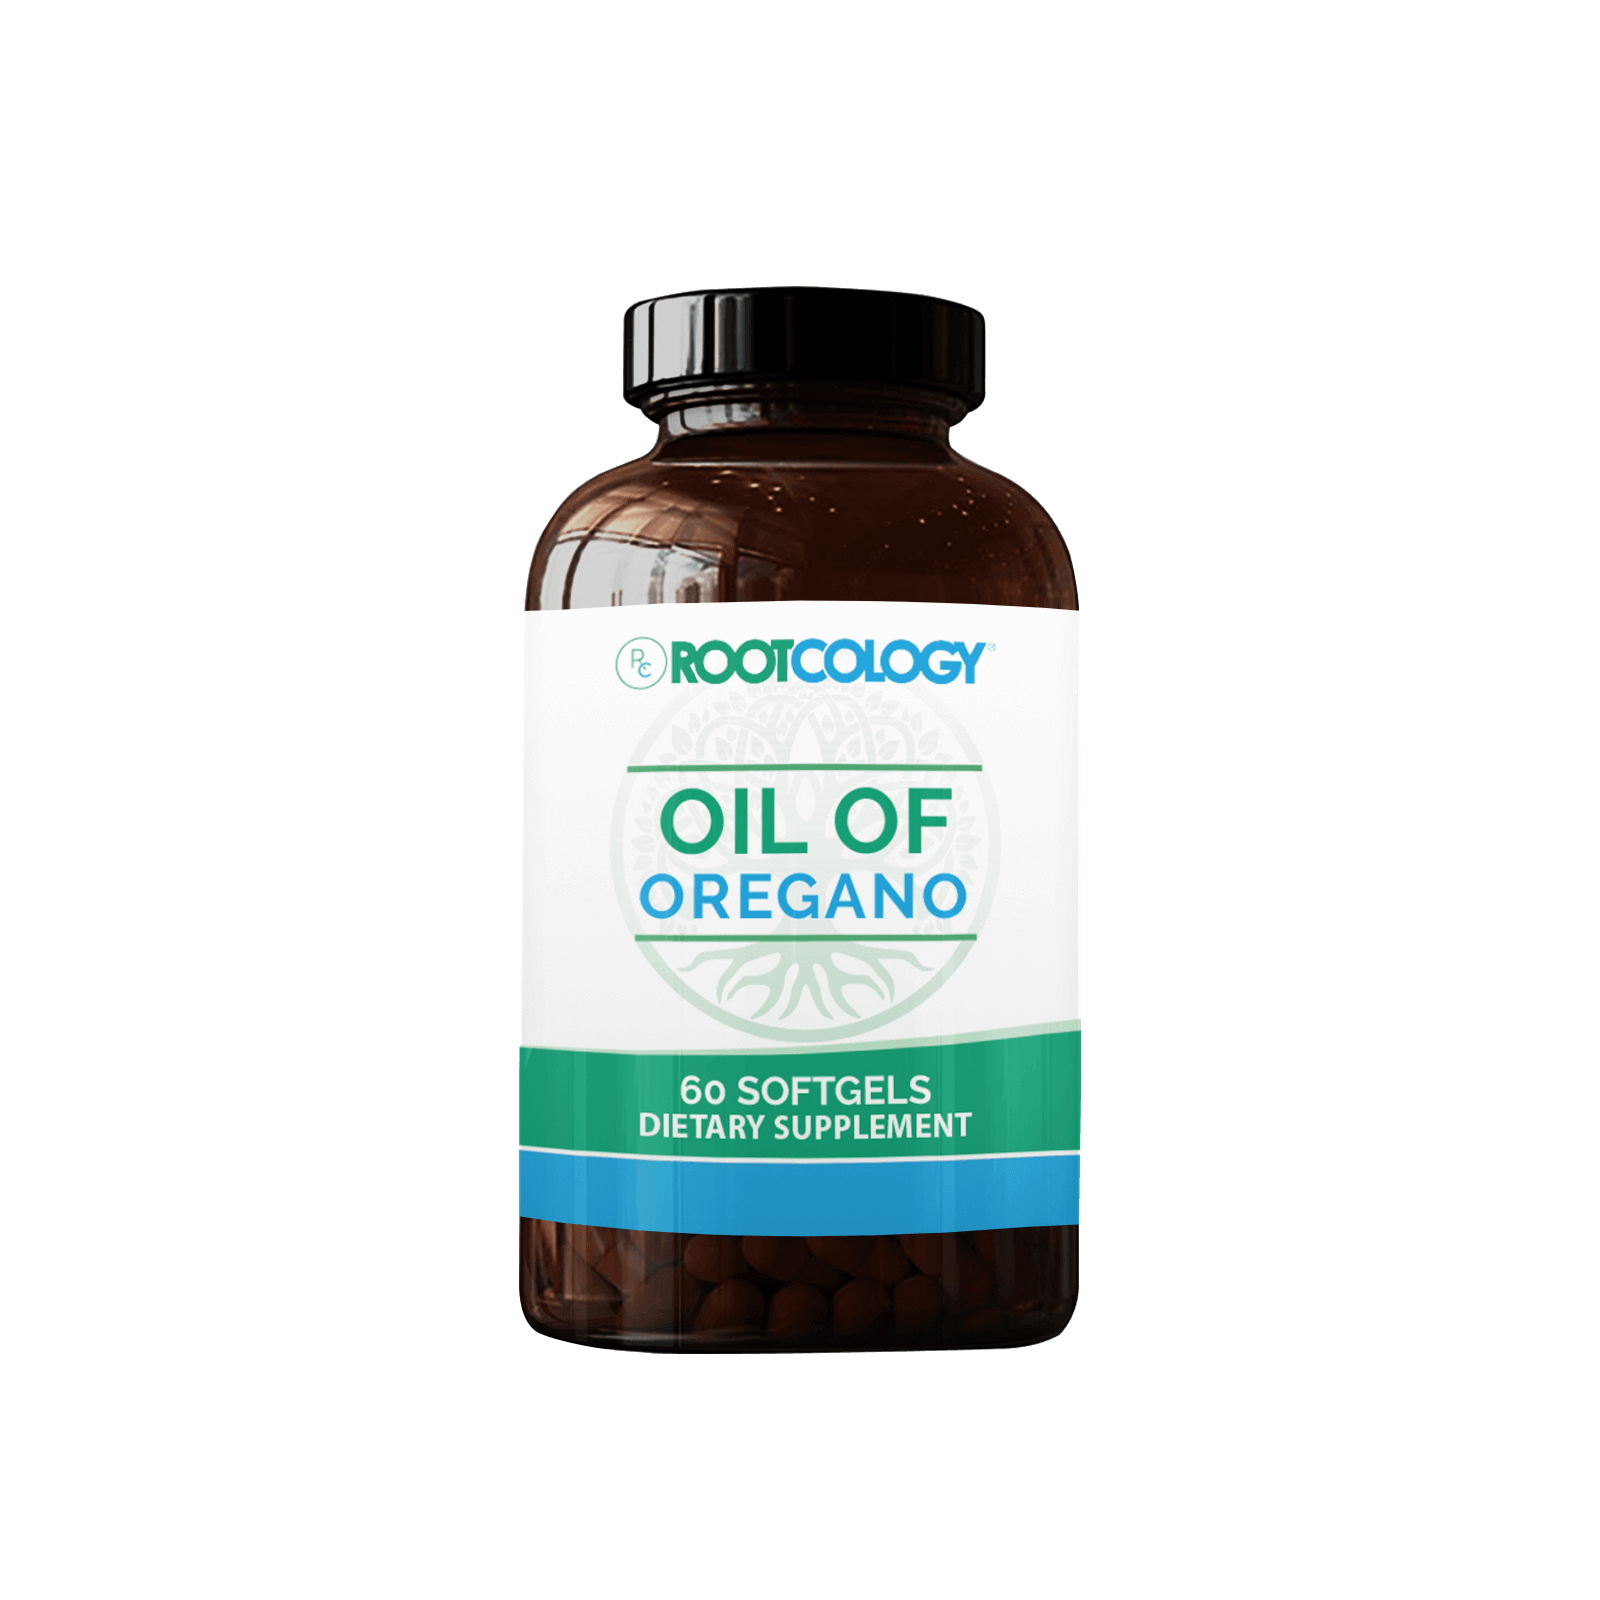 Rootcology Oil of Oregano Supplement